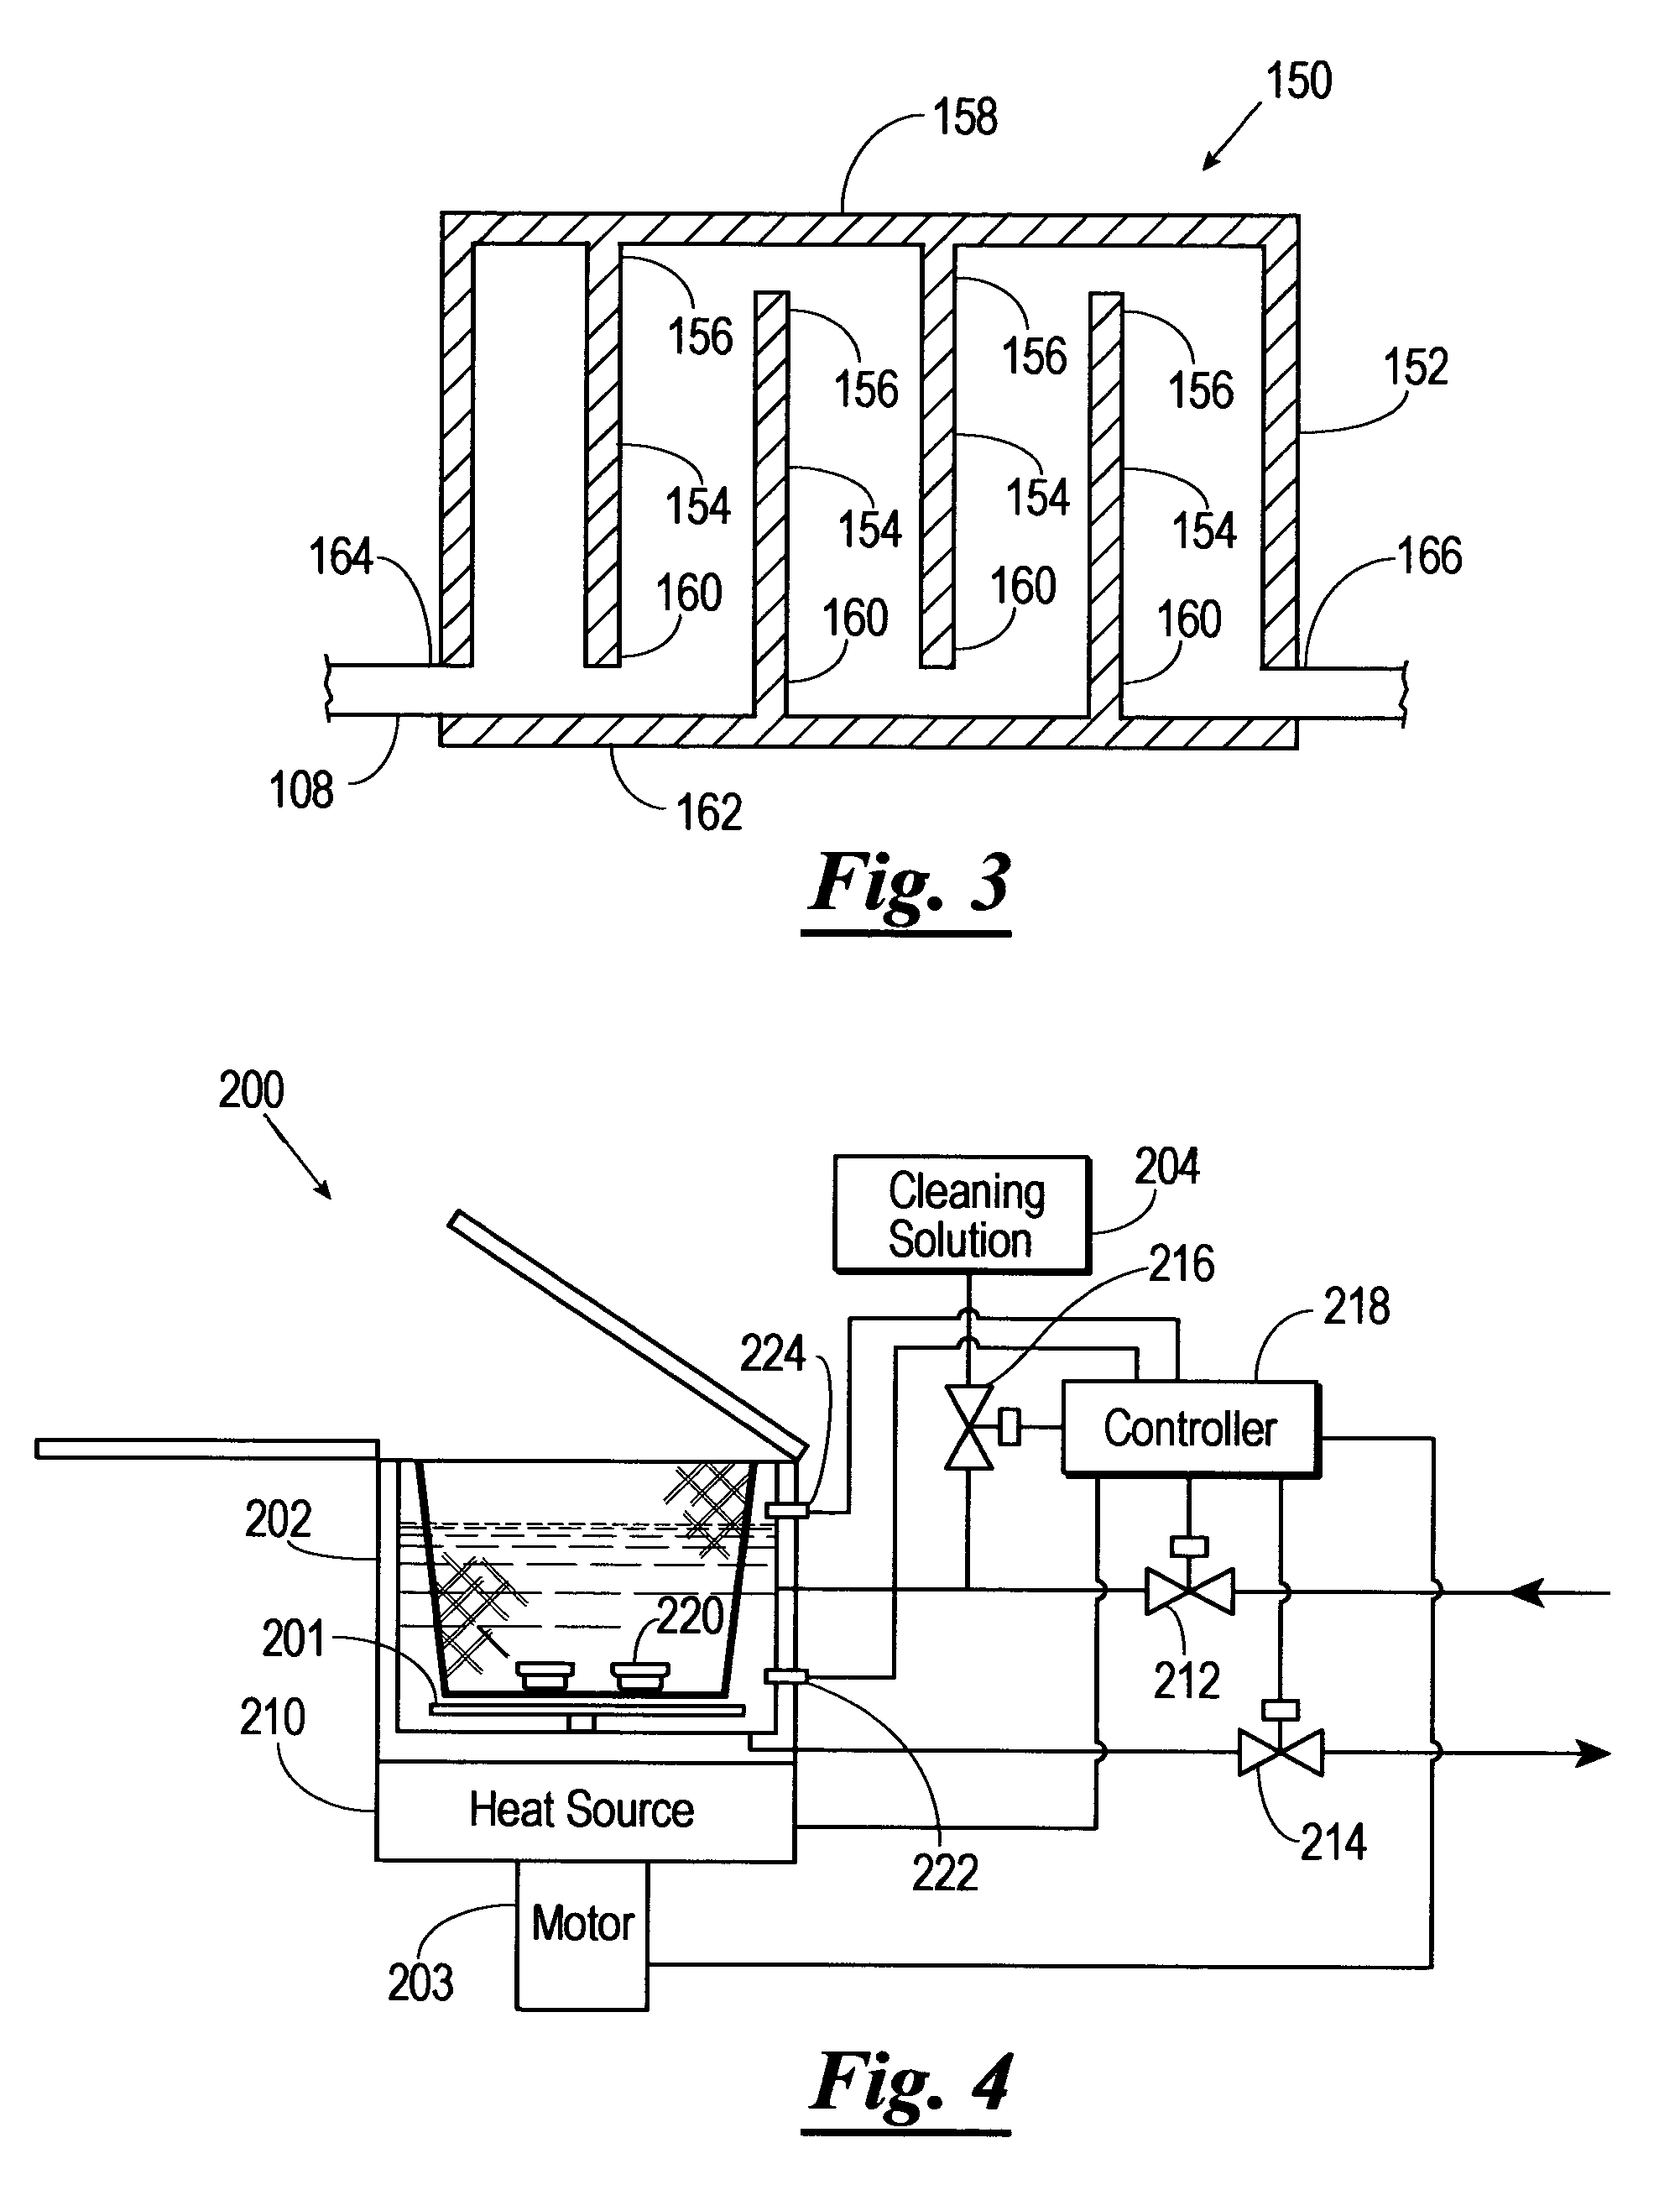 Method for cleaning tissue processing molds